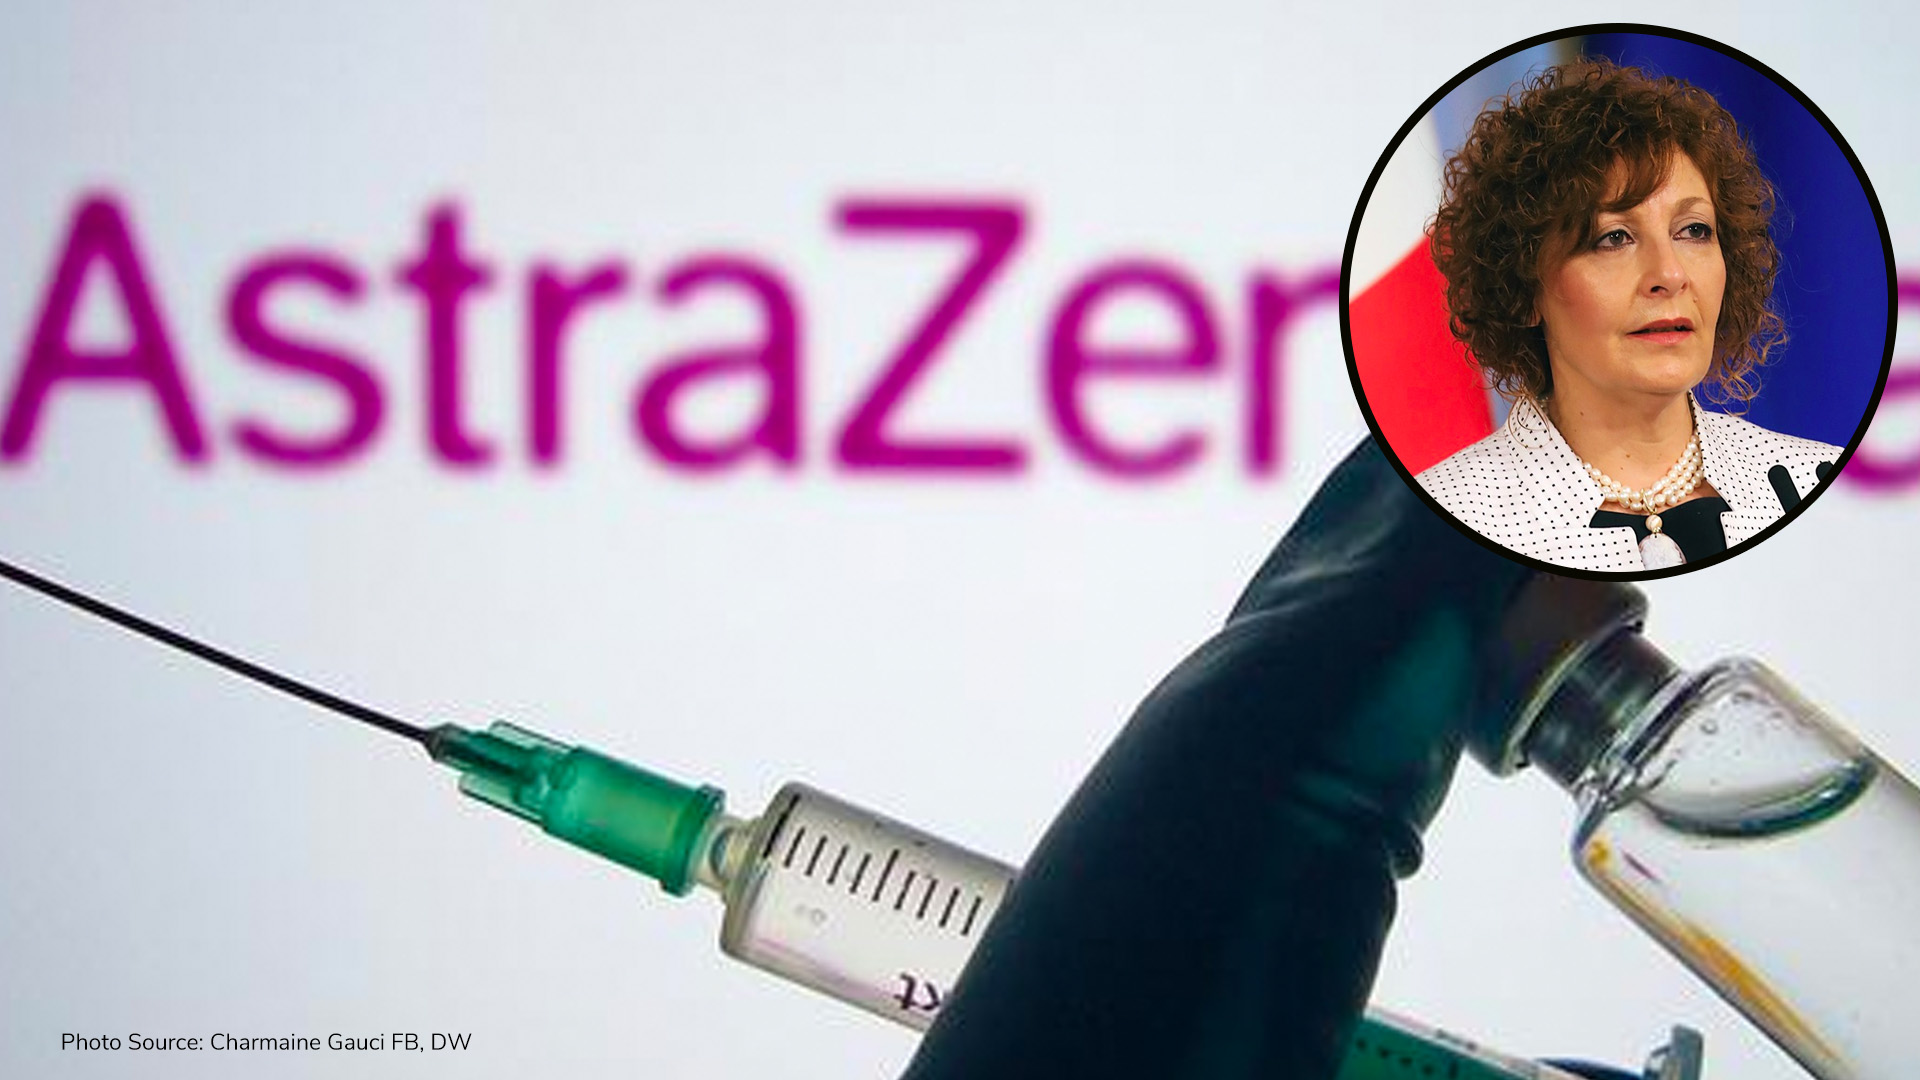 Charmaine Gauci insists there is no link between blood clots and AstraZeneca vaccine